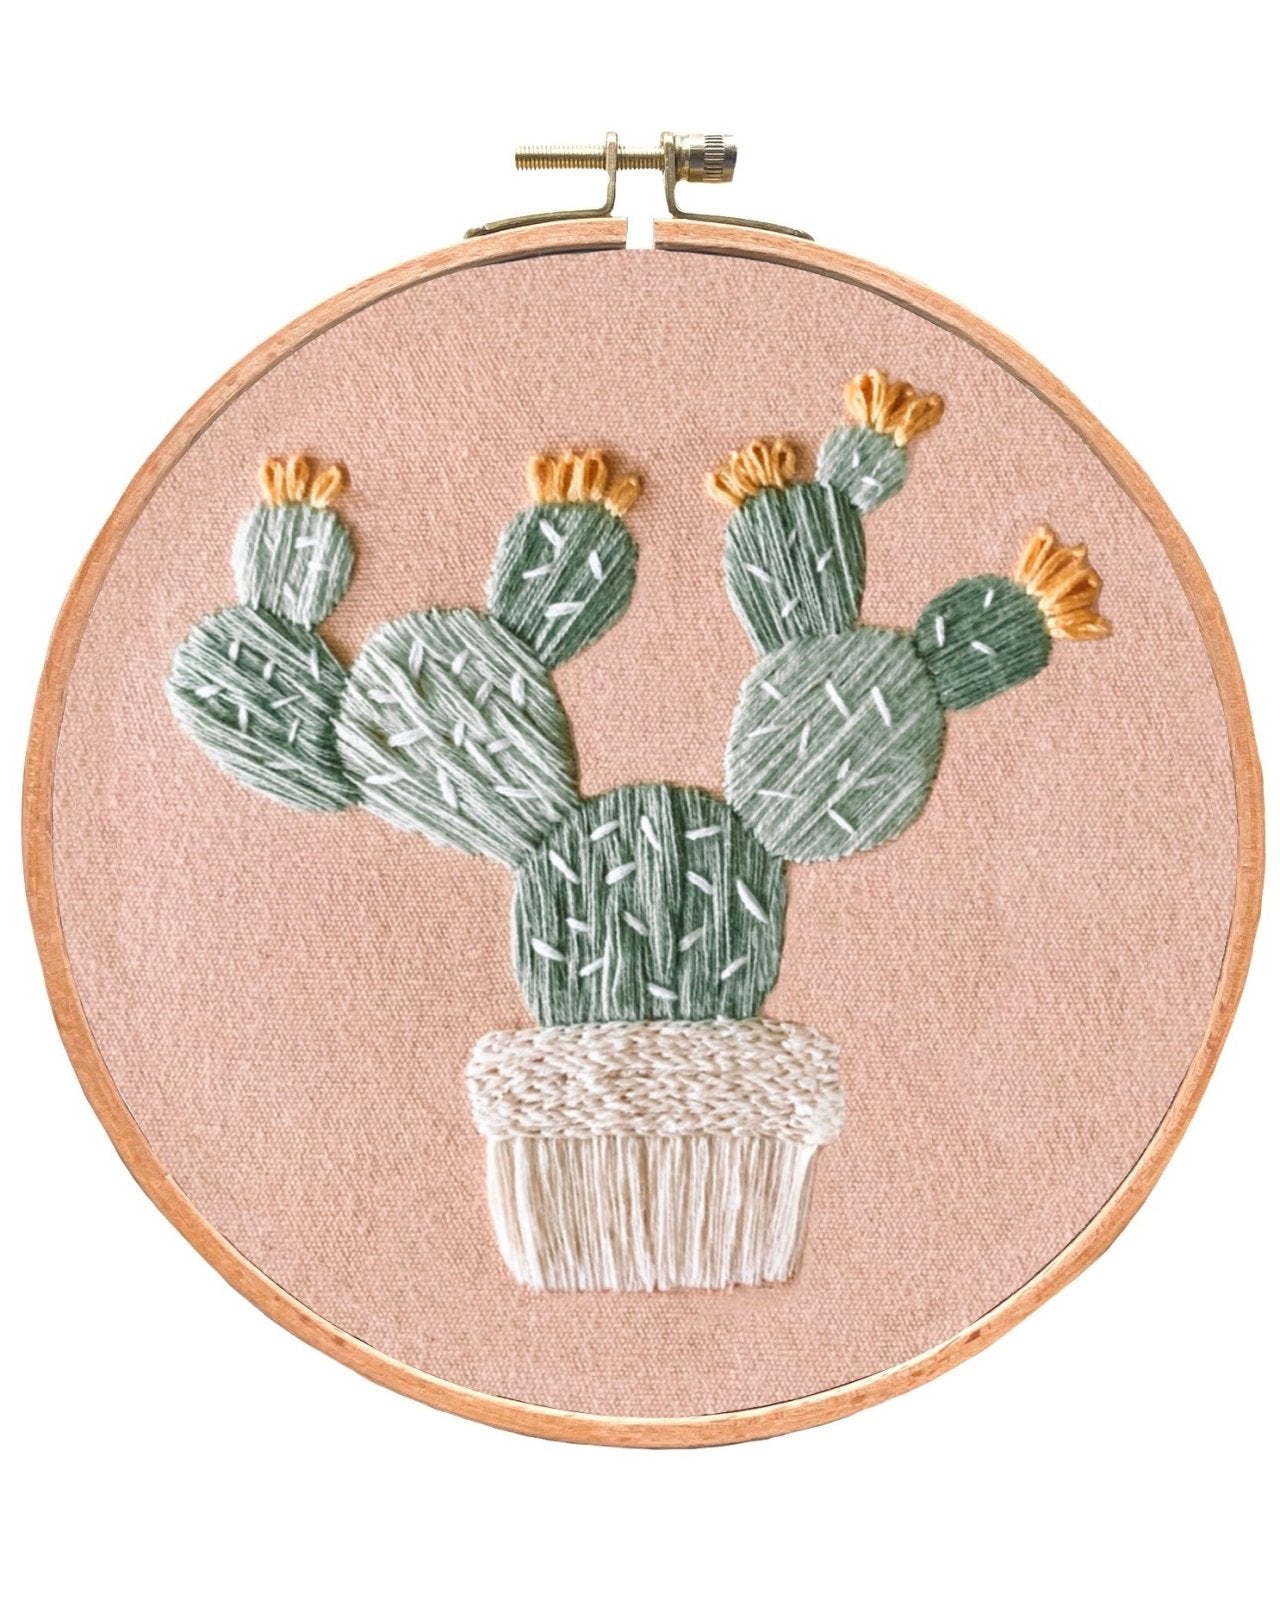 Prickly Pear Cactus Embroidery Kit - Stitched Up Kits